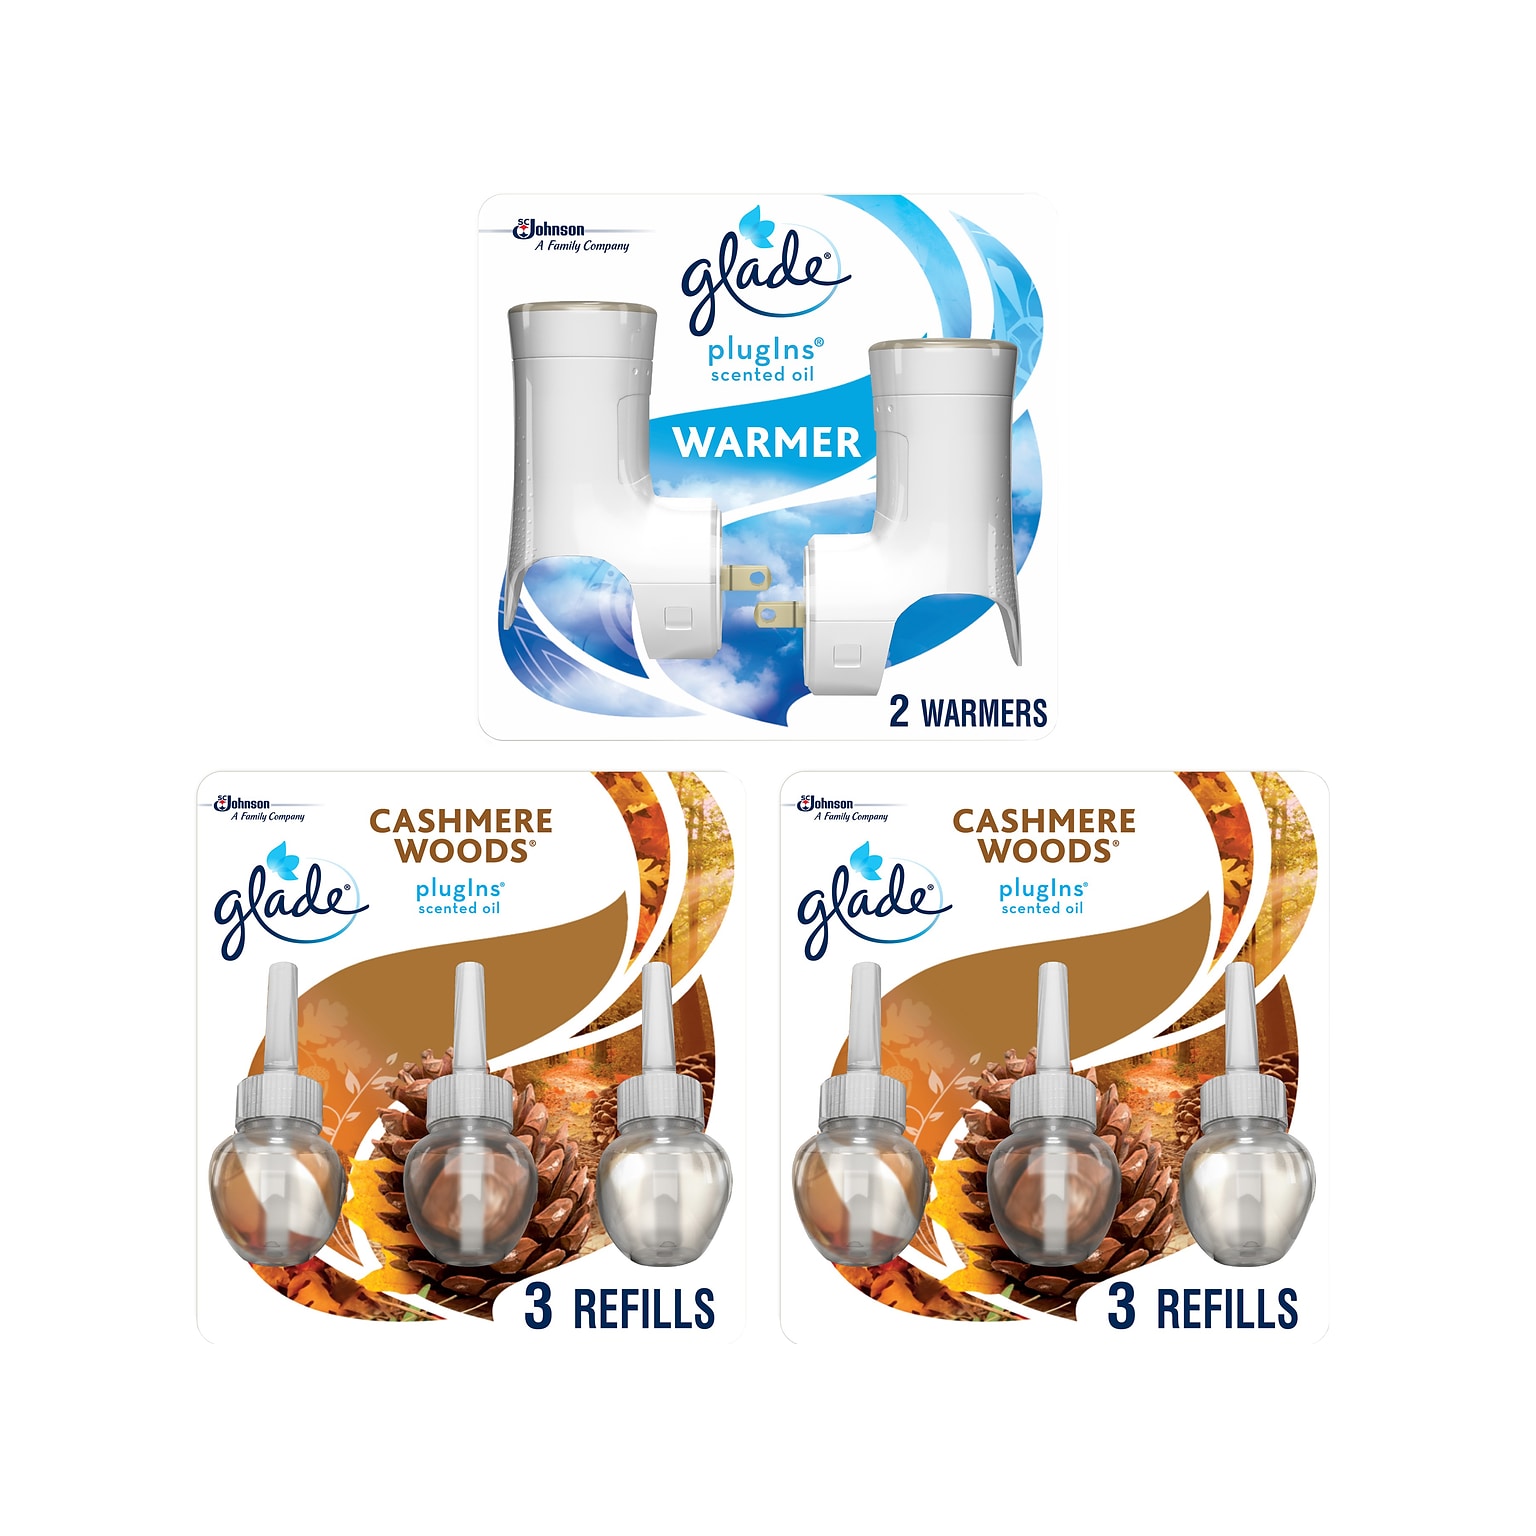 Glade PlugIns Scented Oil & Holders, Cashmere Woods, 0.67 Oz., 8/Pack (328607)